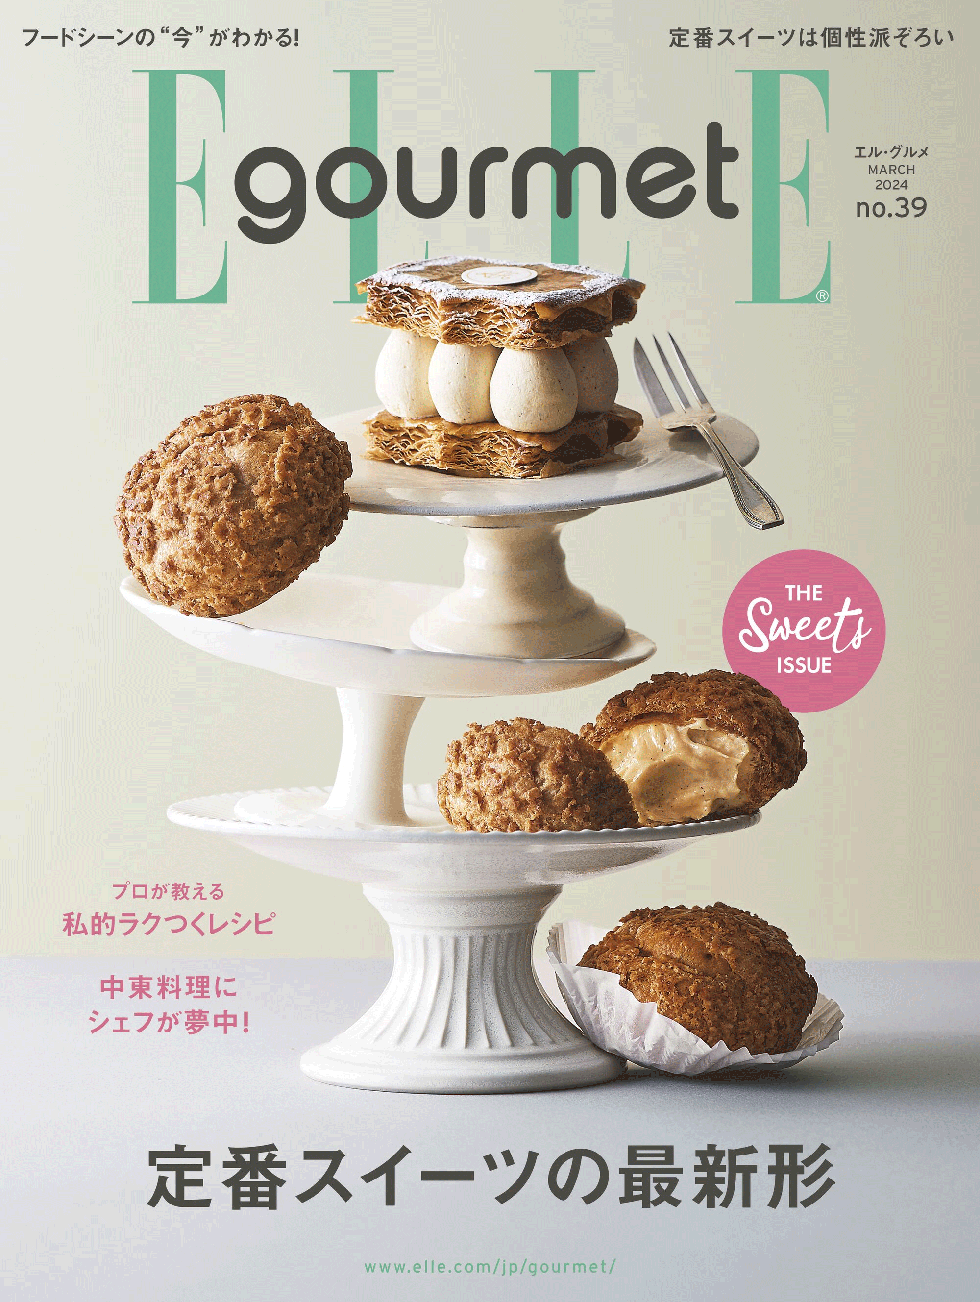 a magazine cover with a plate of food